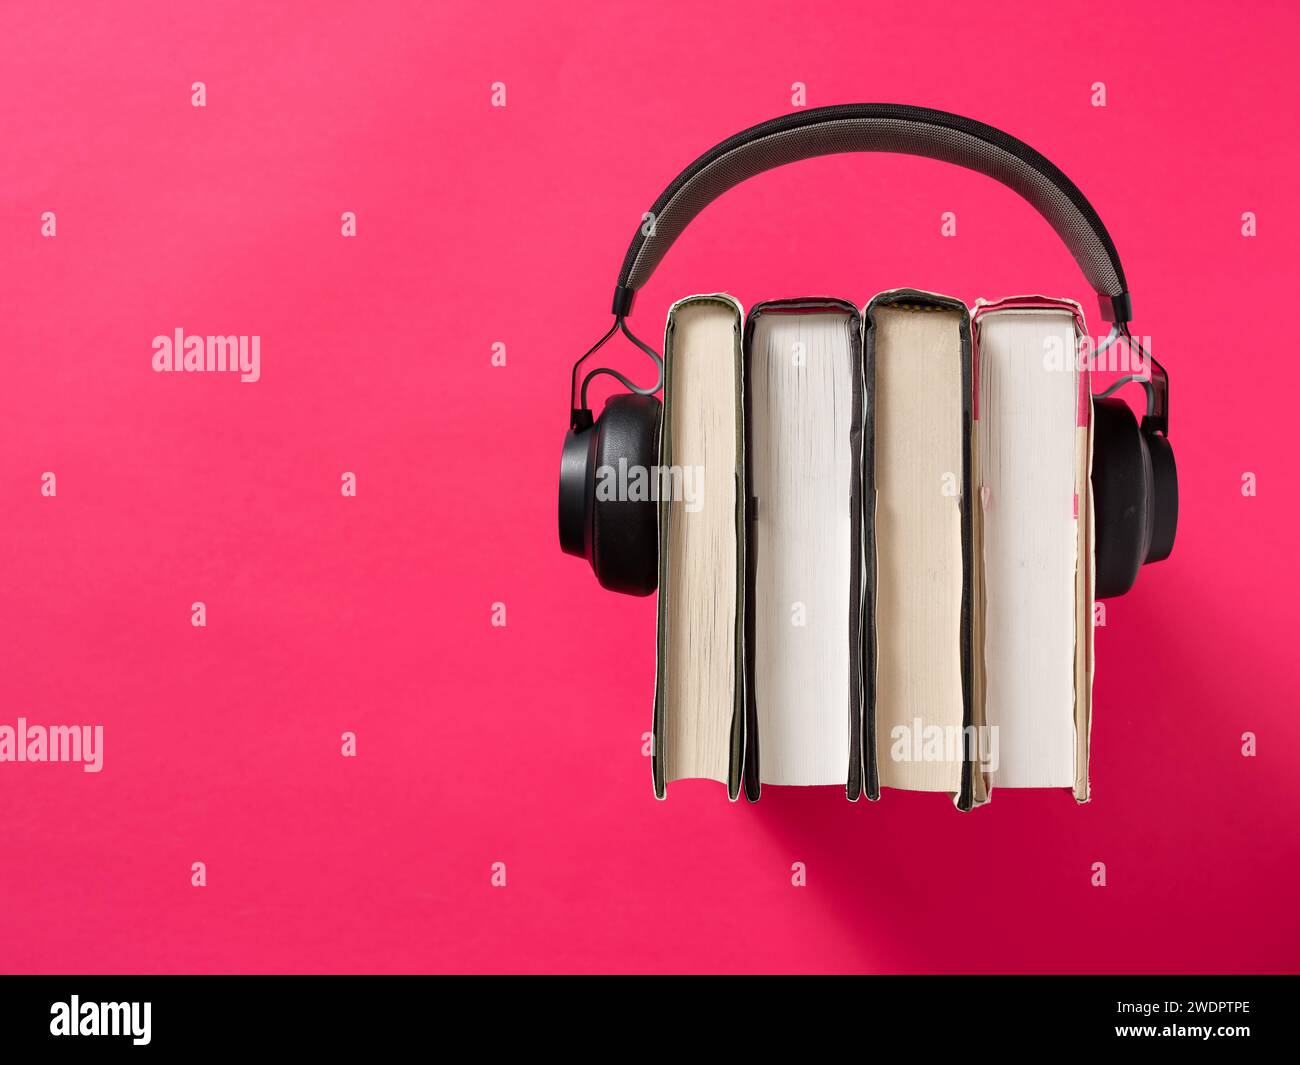 Audiobook concept. Online learning and education. Listen literature e-books in audio format. Headphone with stack of books on red background. Stock Photo